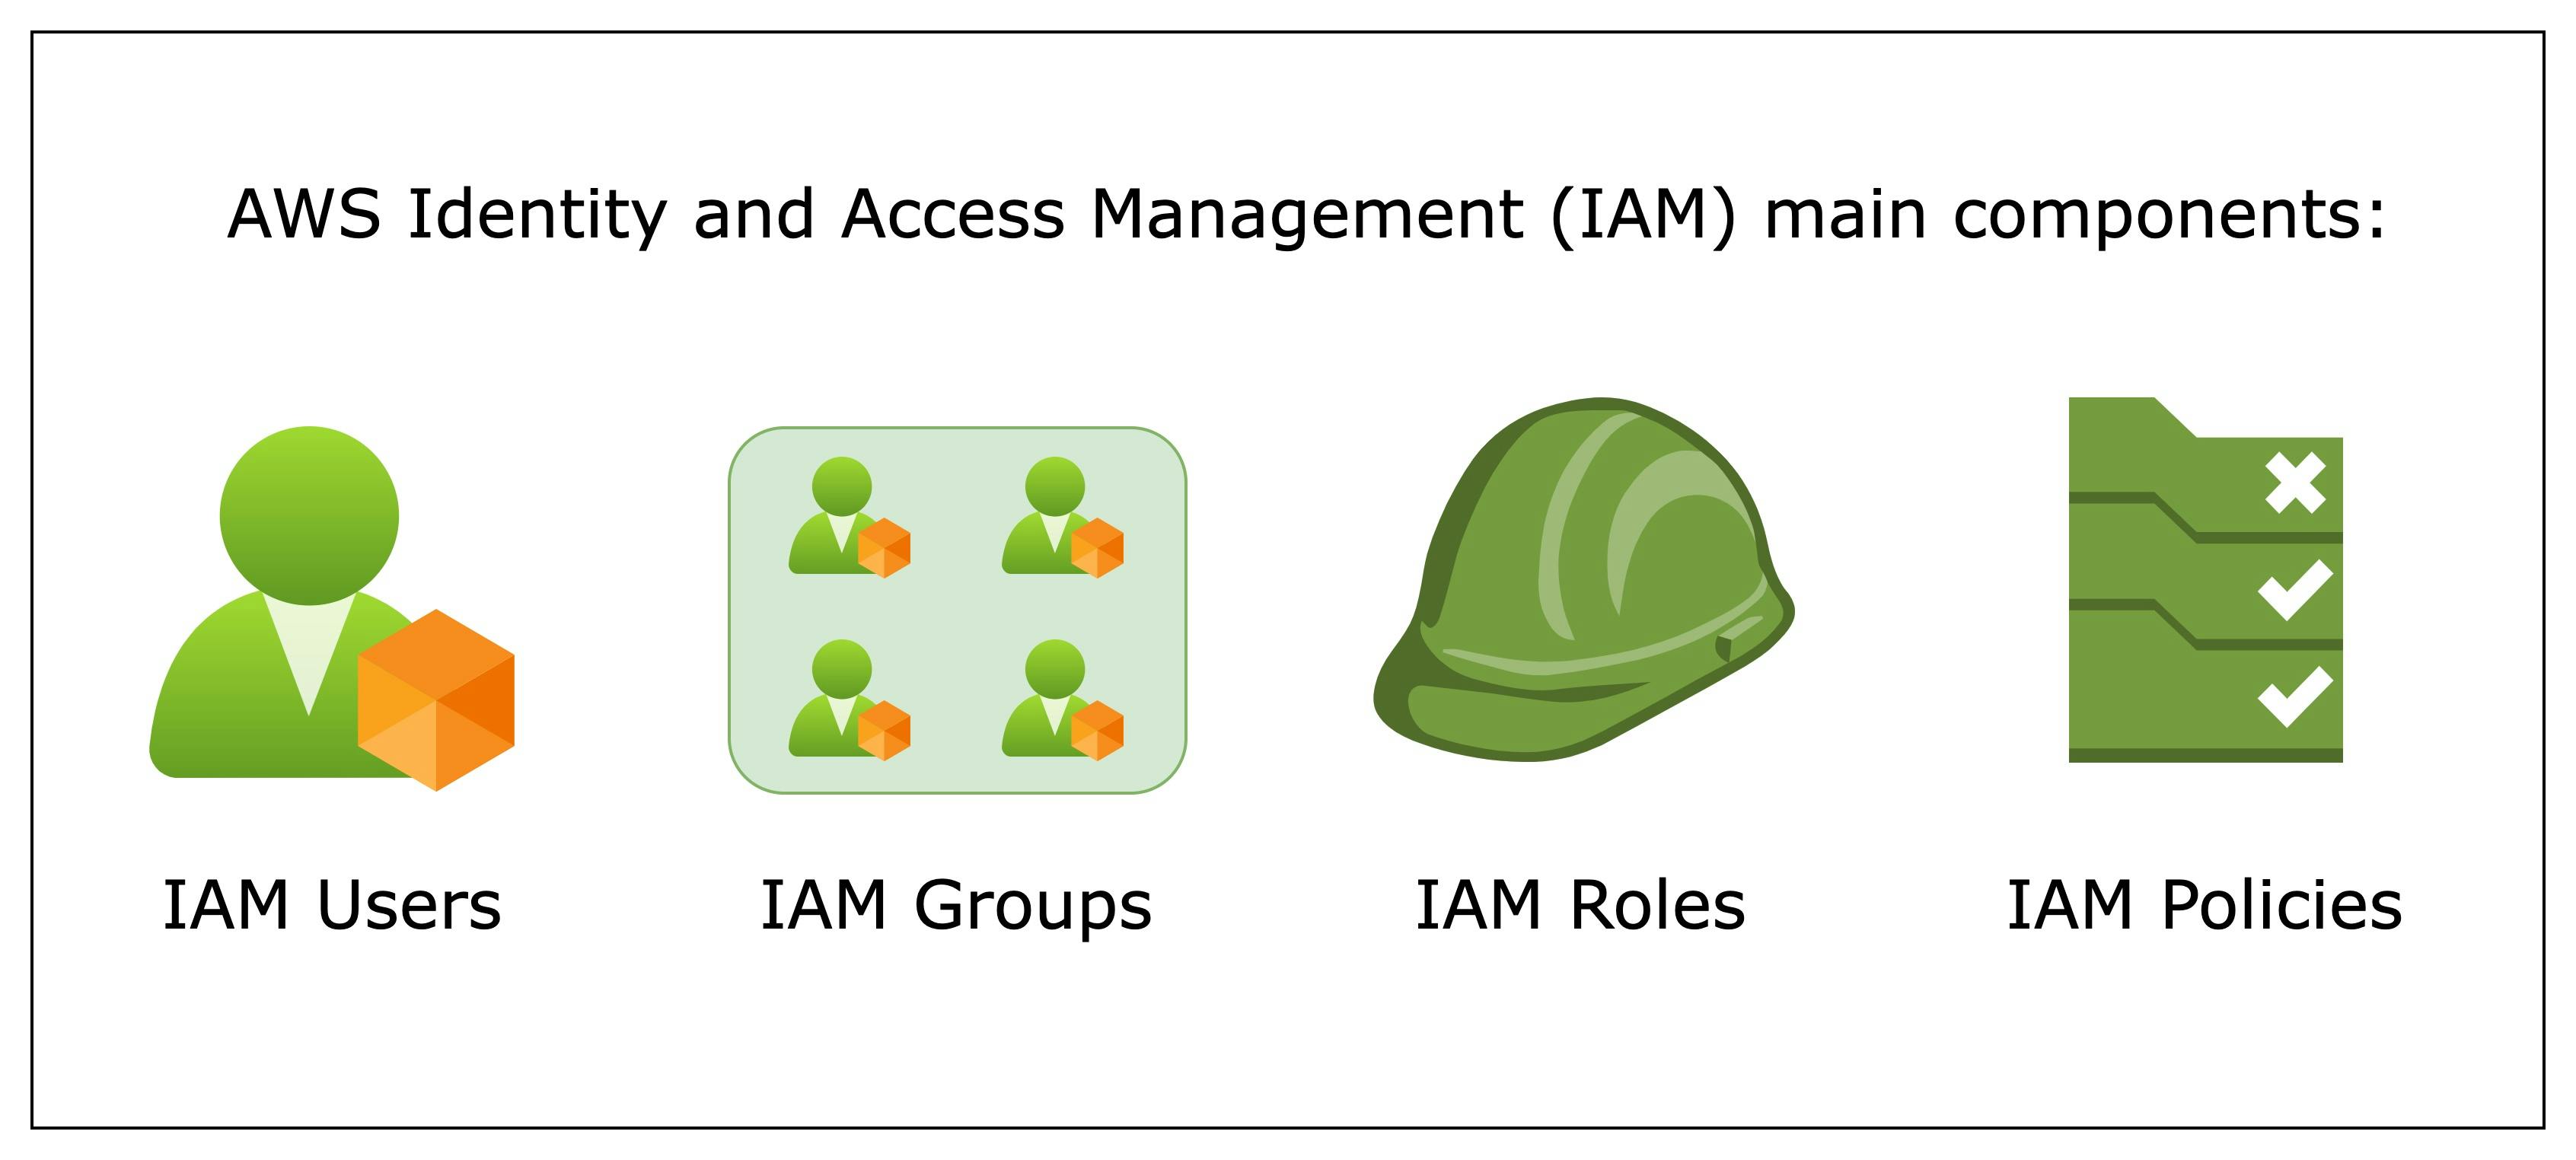 Main components of Amazon Web Services (AWS) Identity and Access Management: IAM Users, IAM Groups, IAM Roles and IAM Policies.